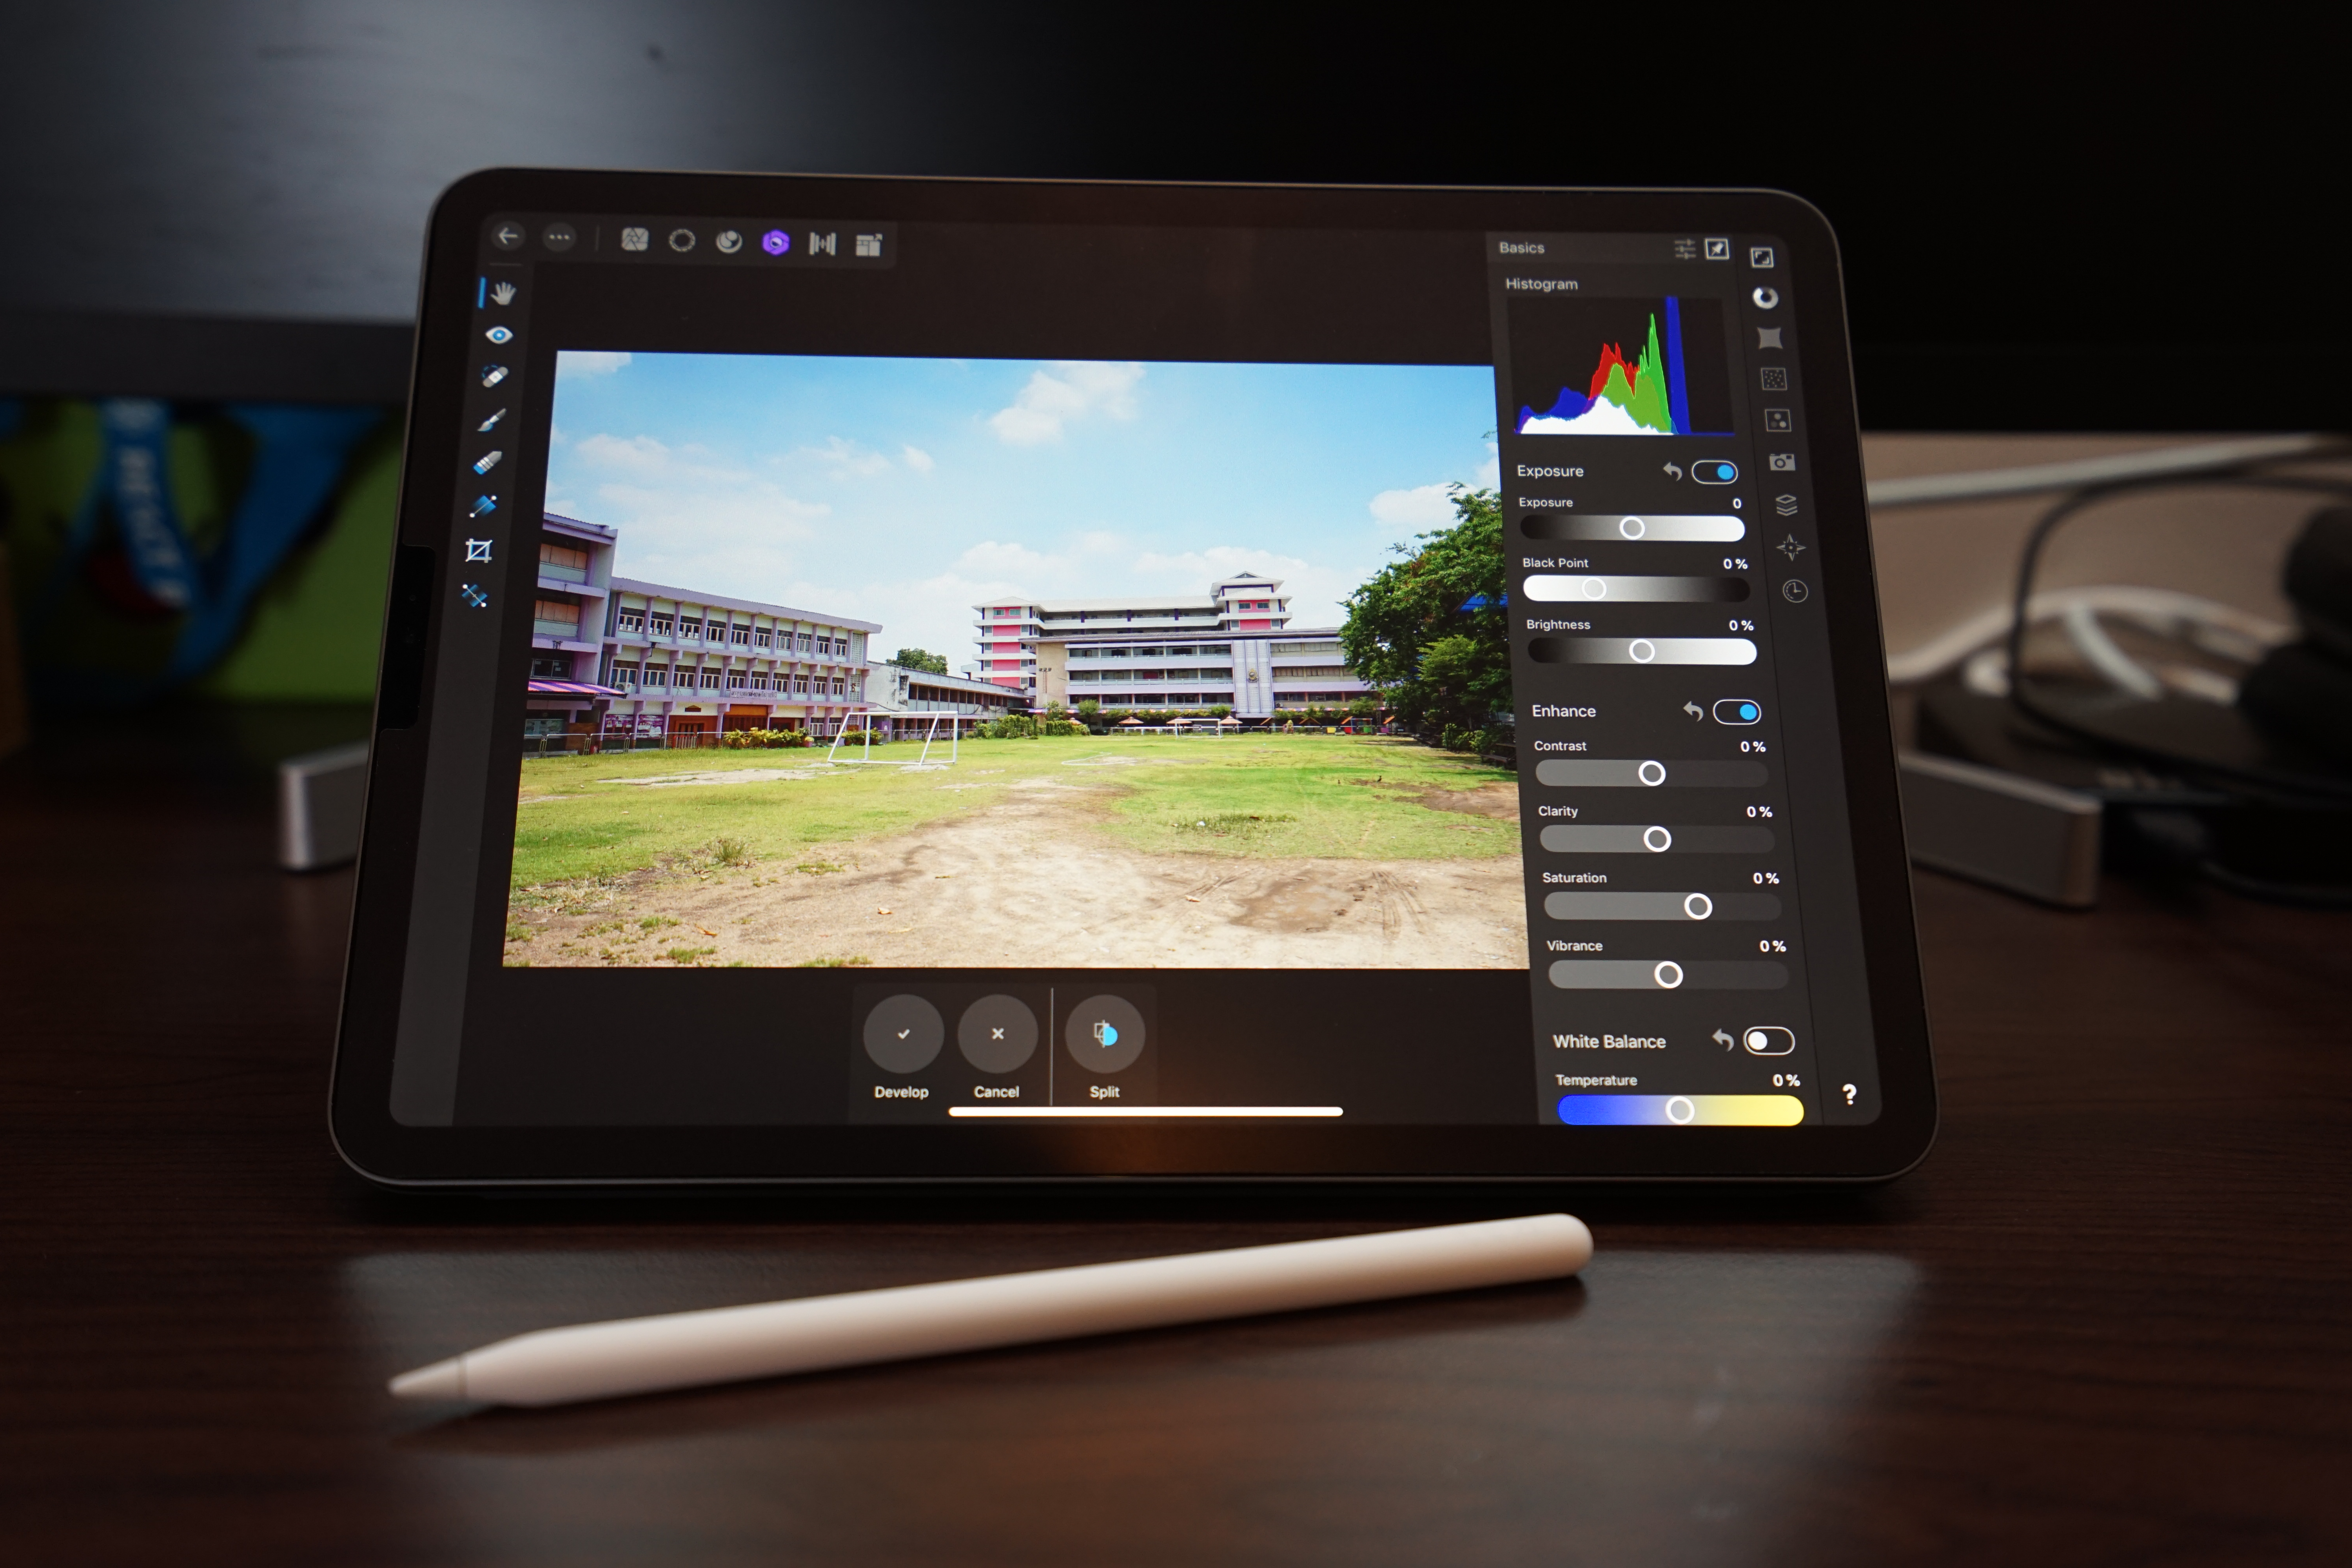 iPad Pro 11-inch with Affinity Photo